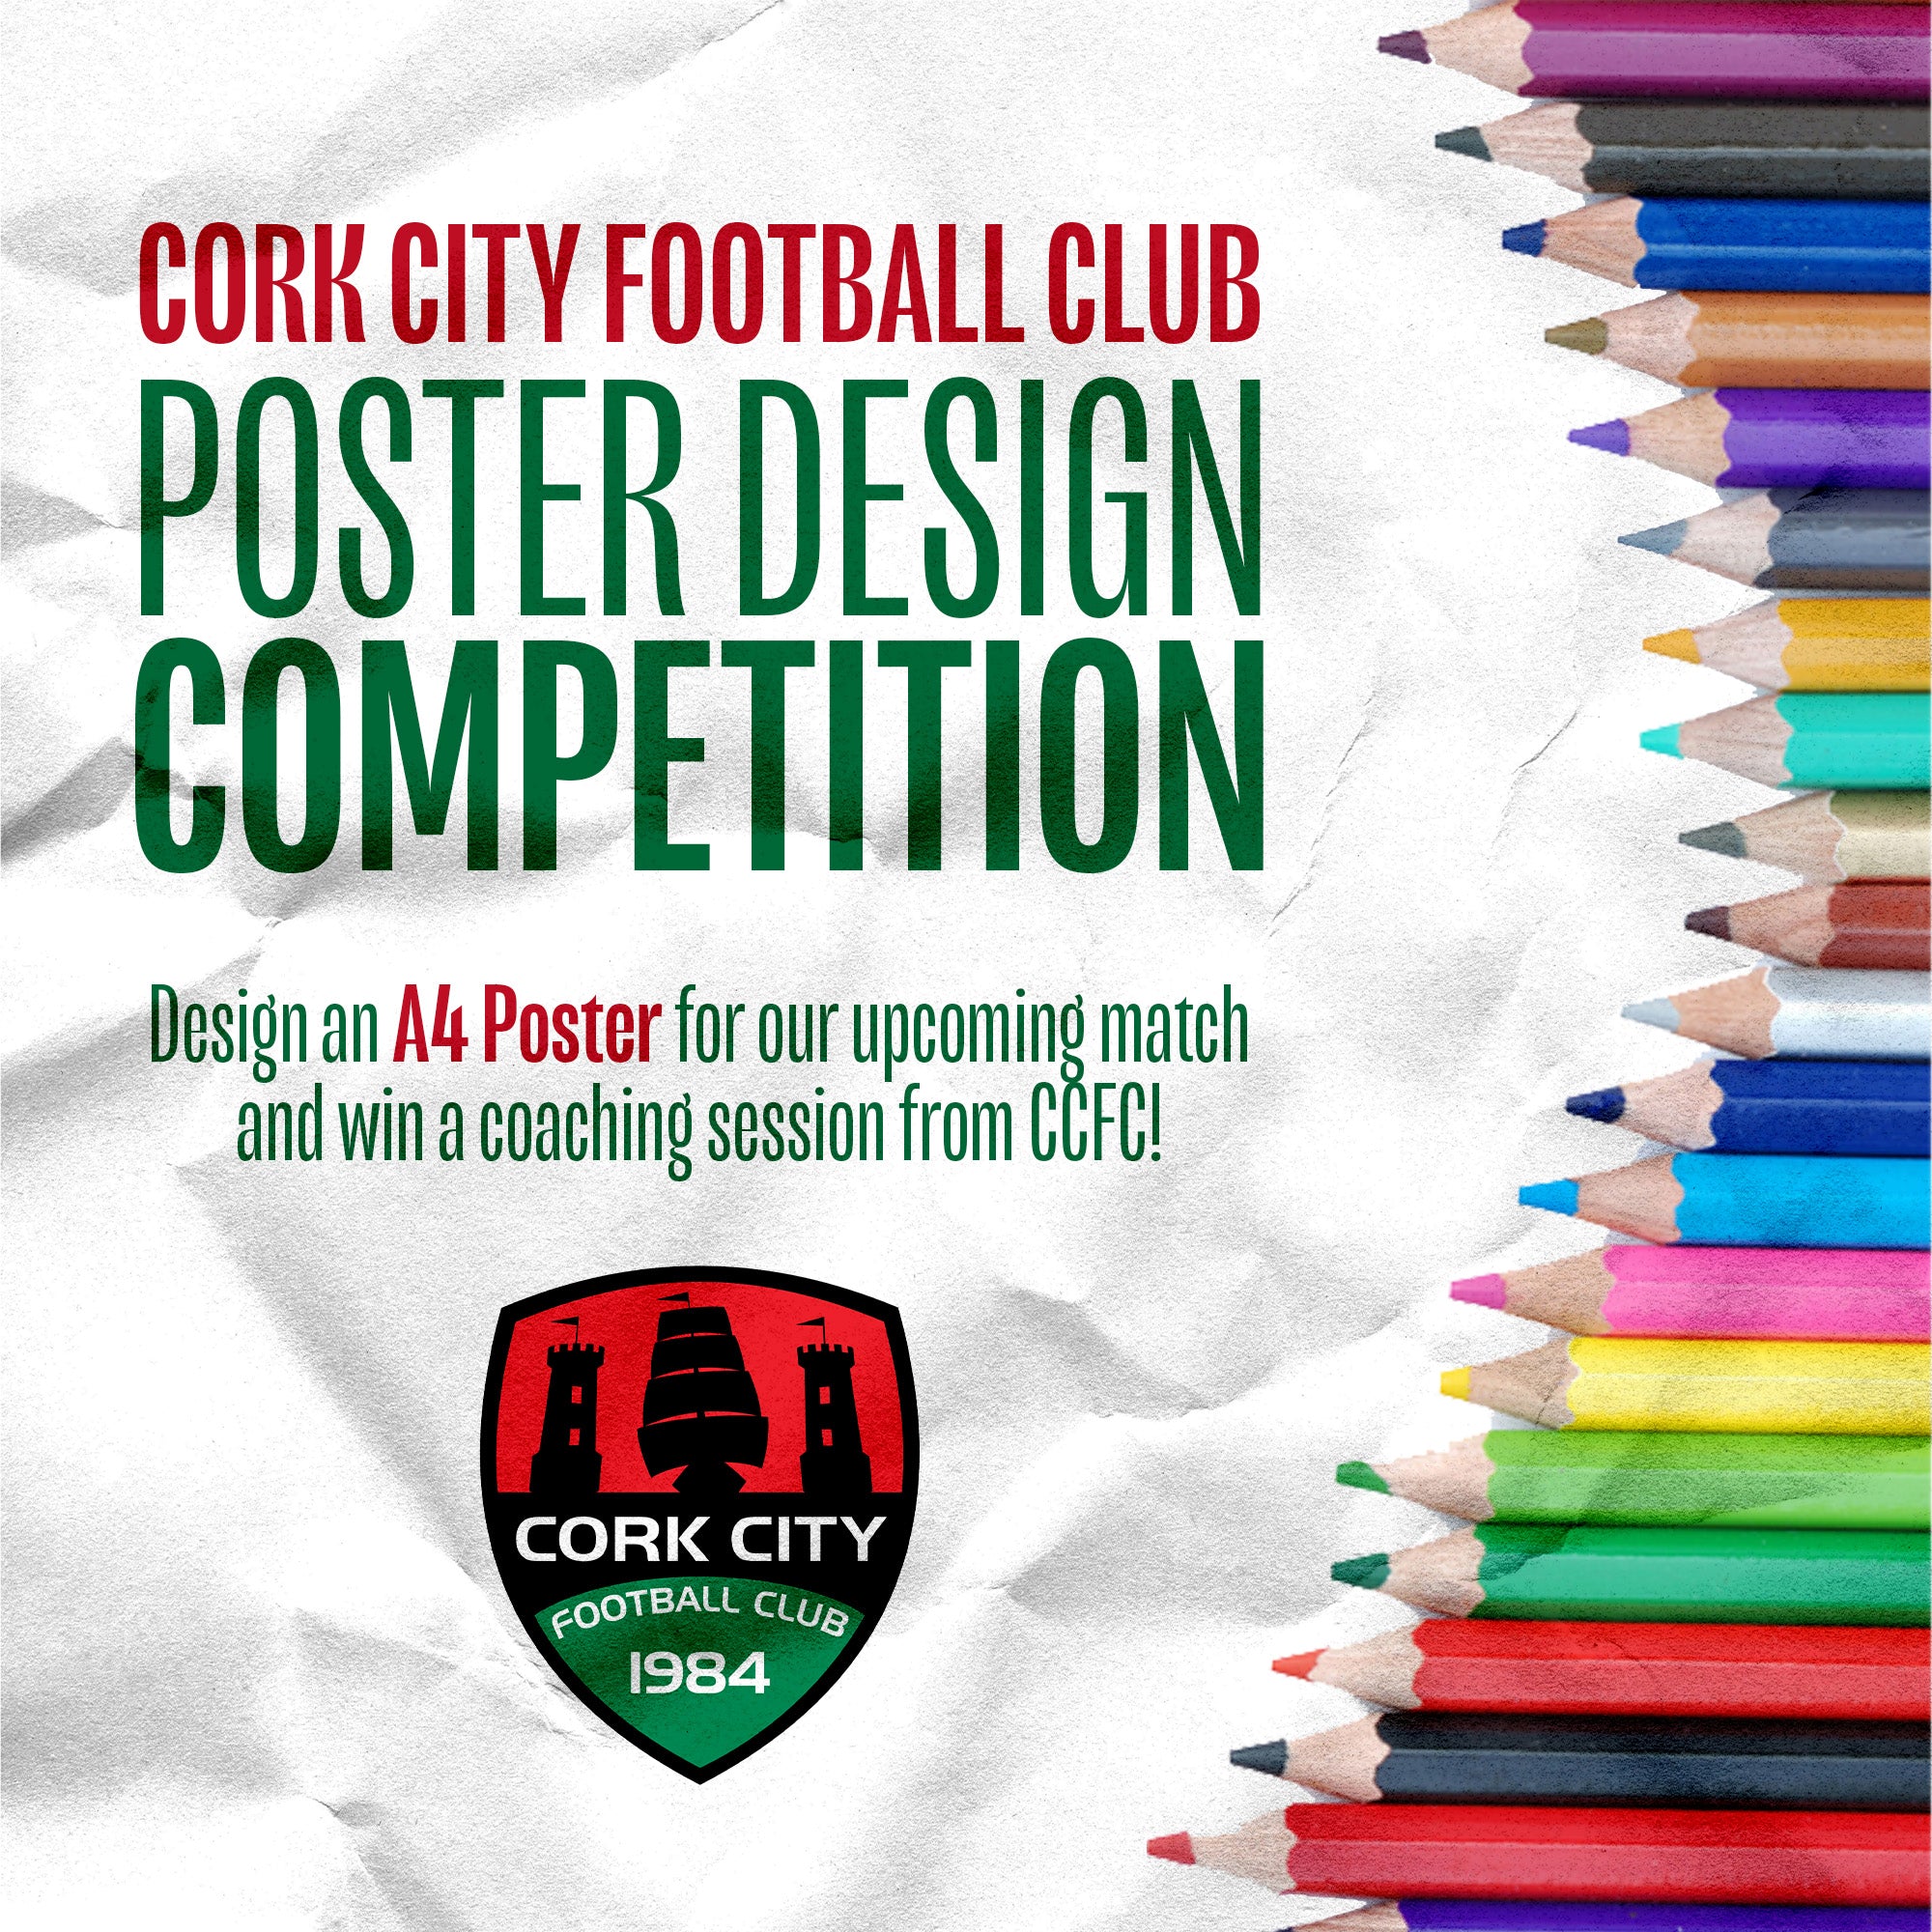 Design A Poster Competition!